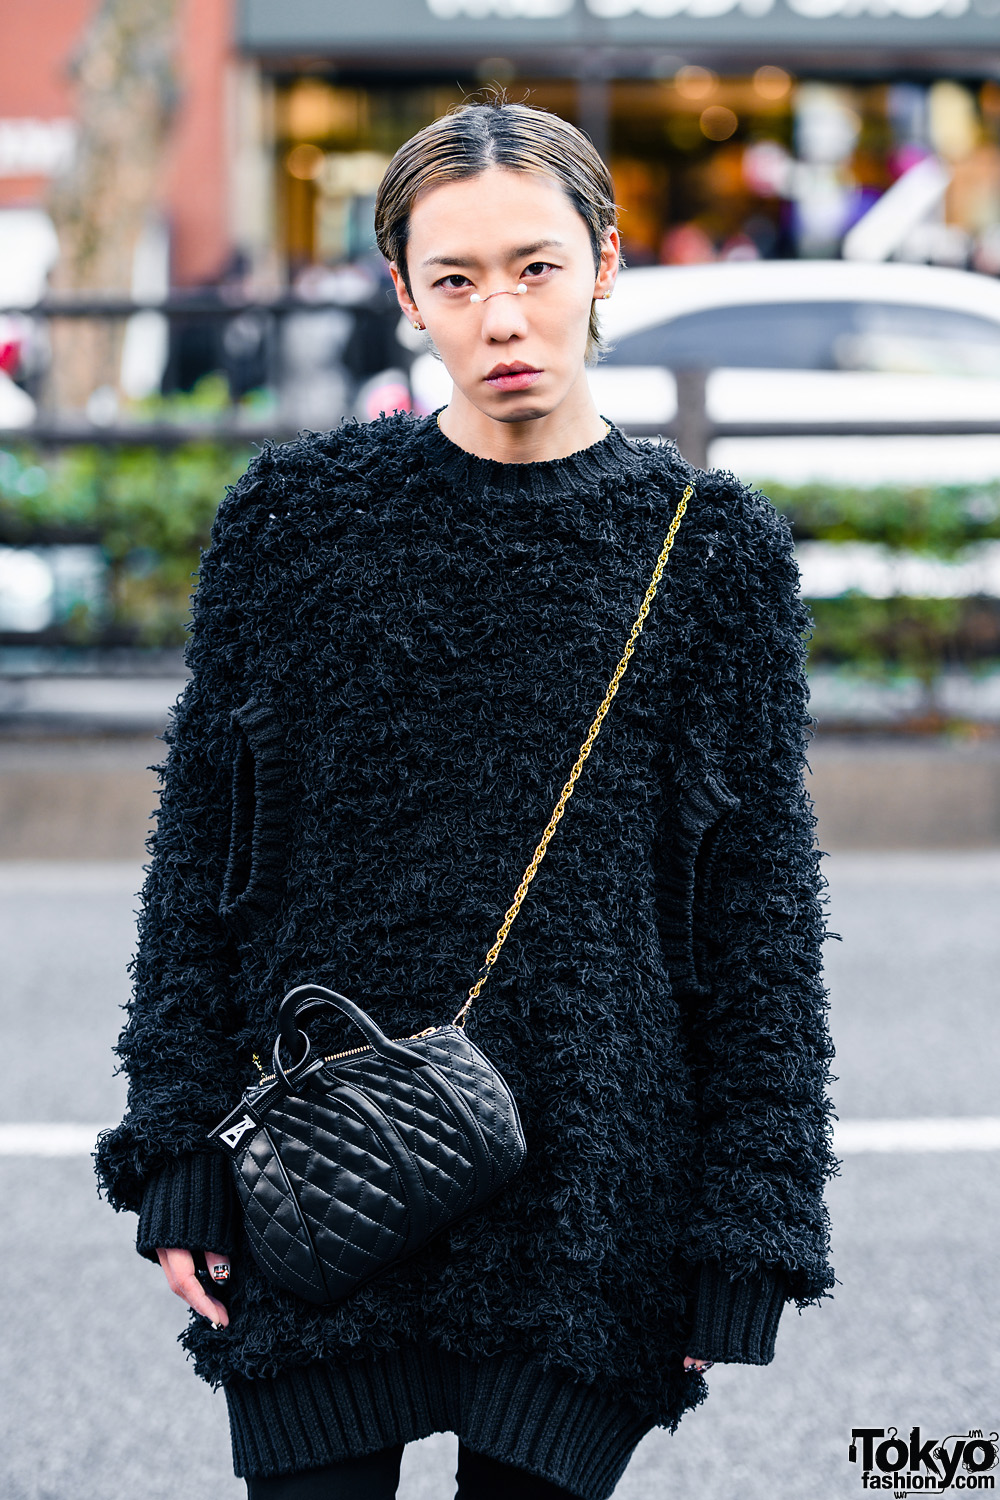 All Black Tokyo Style w/ Nose Jewelry, Cool Nail Art, John Lawrence